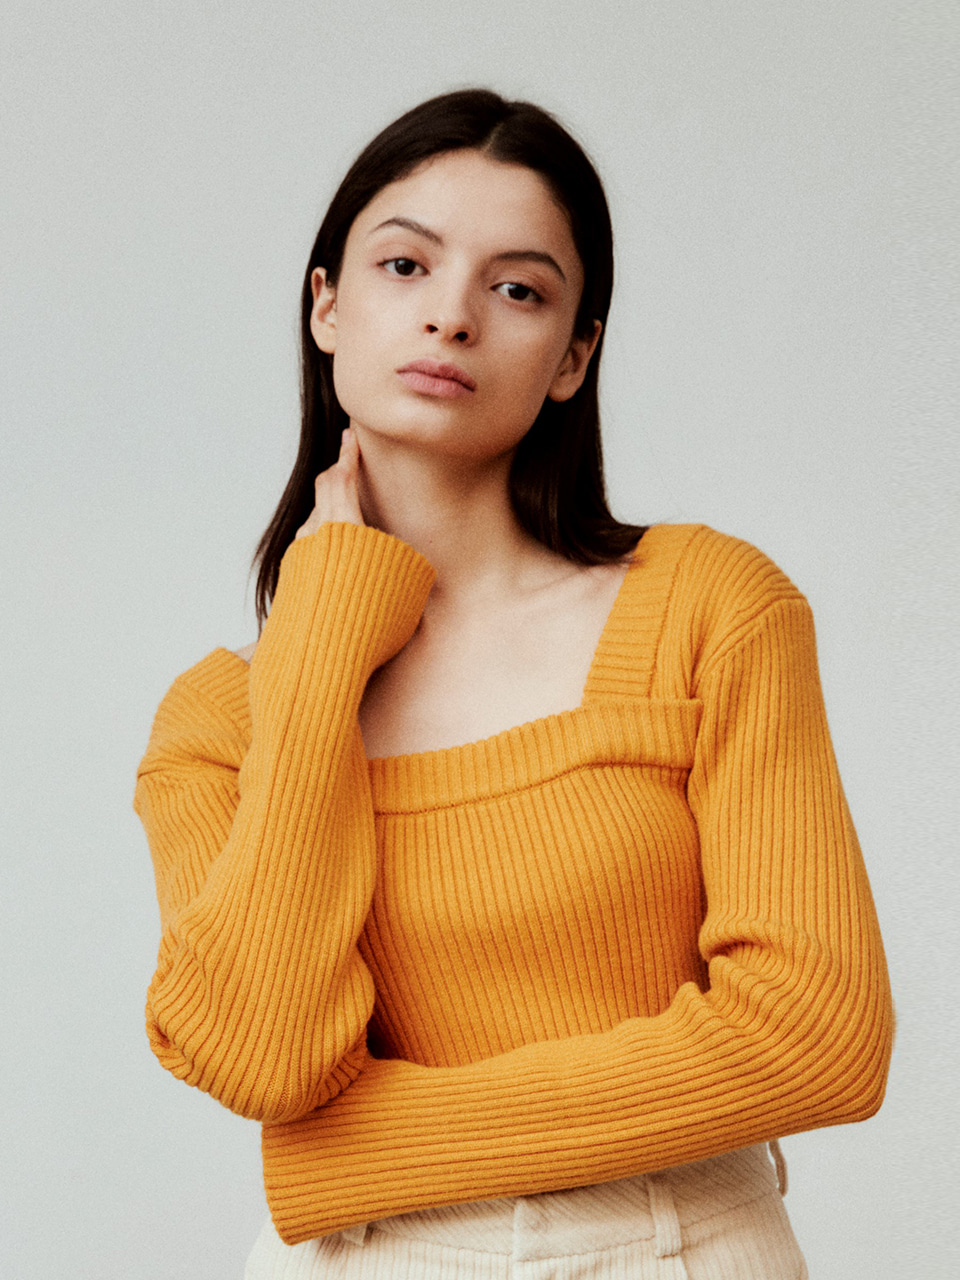 TWO WAY NECK POINT KNIT TOP